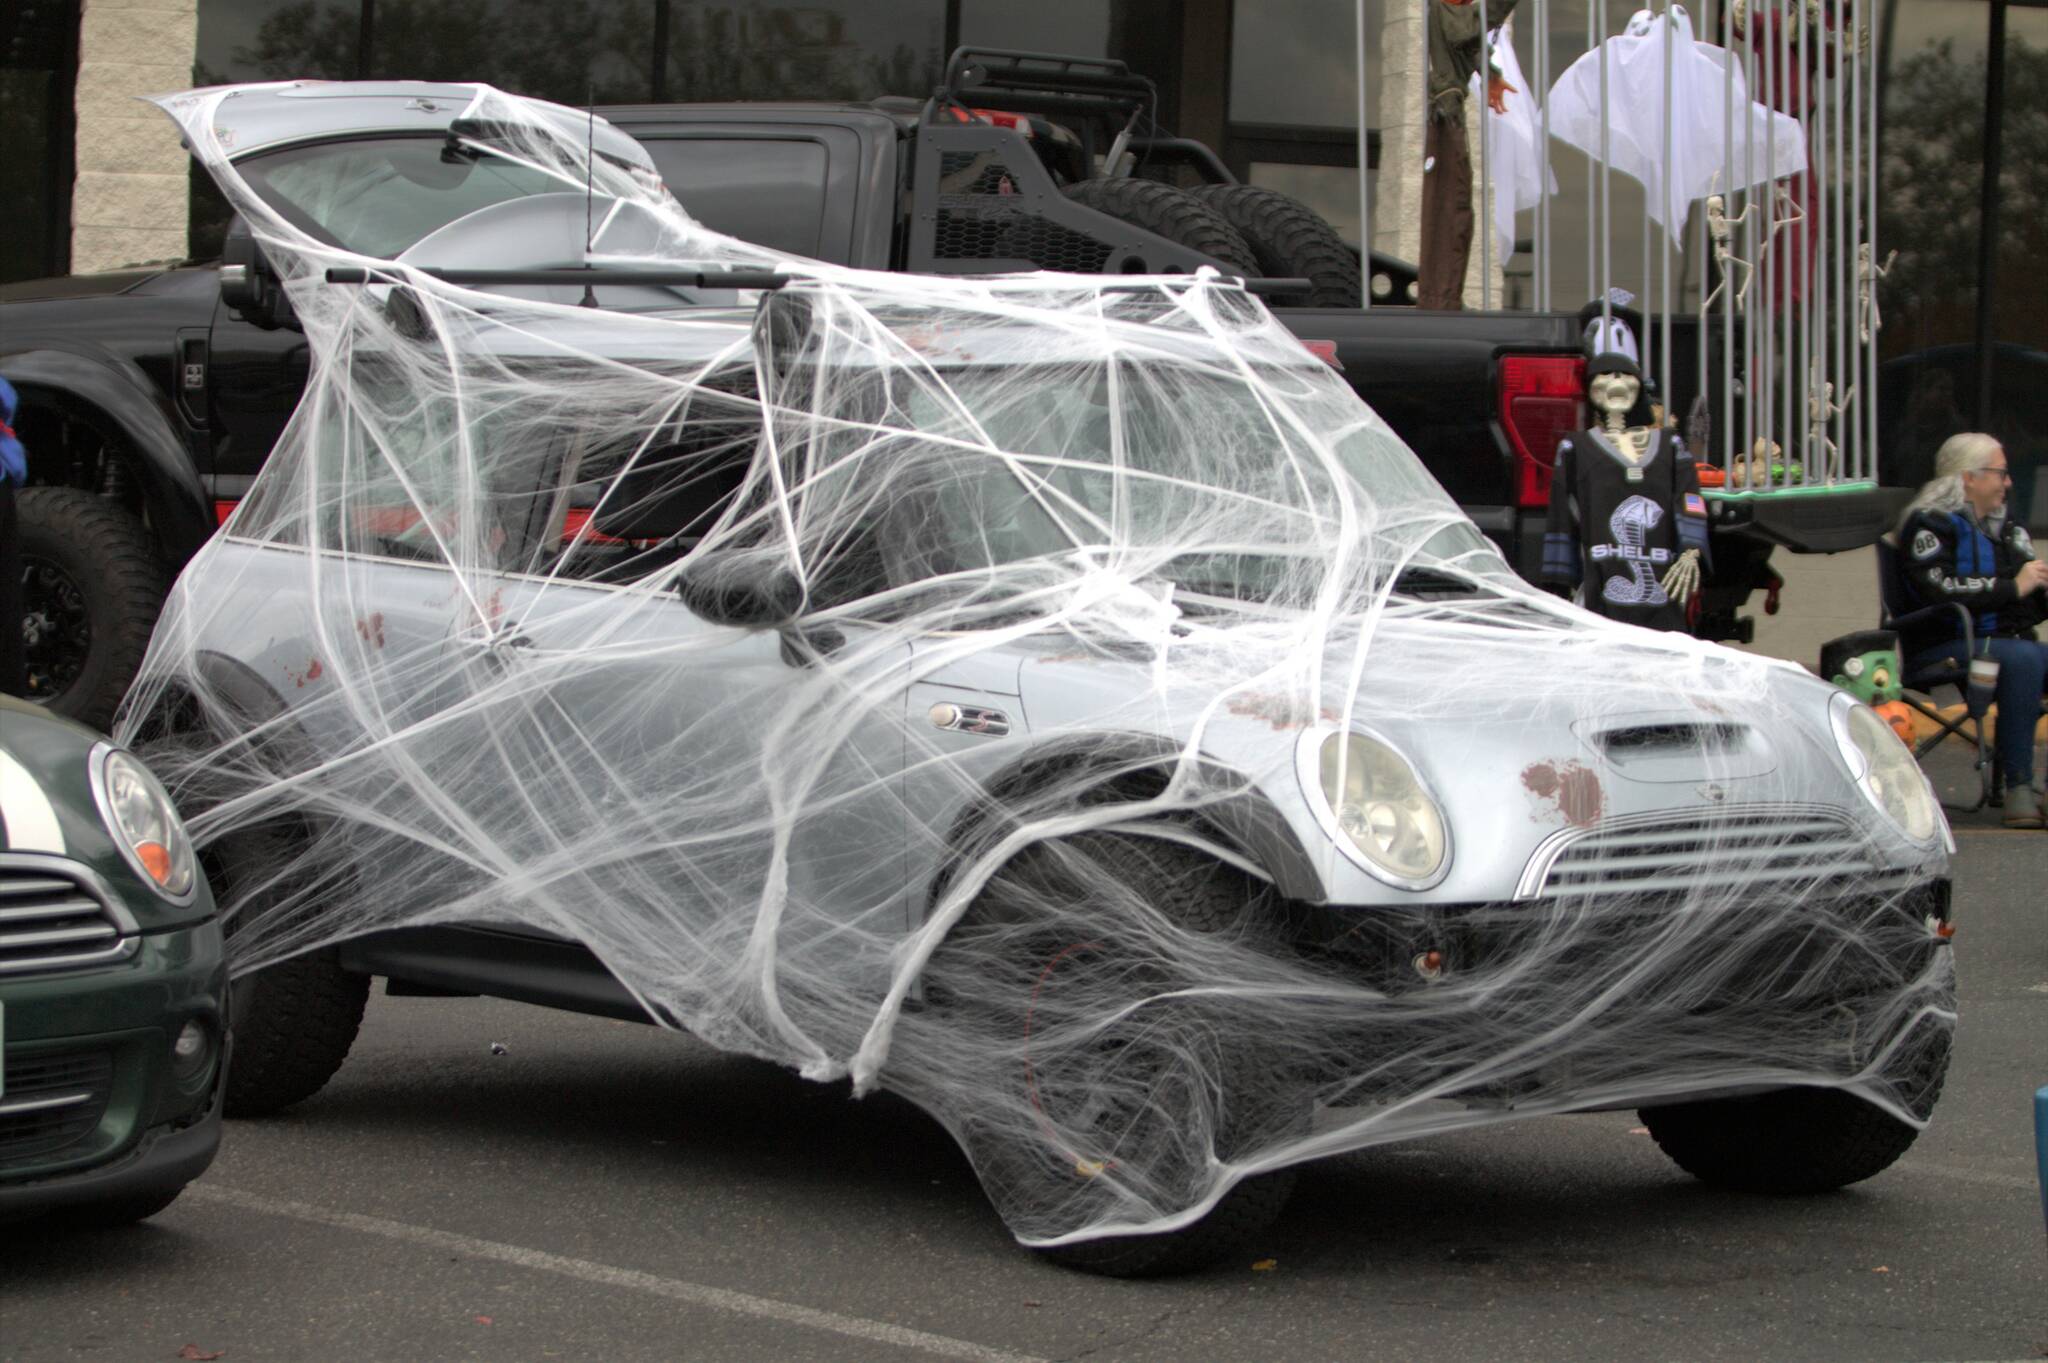 Decorated cars like this one swarm the parking lot of That One Place for its annual trunk or treat event Oct . 31. Elisha Meyer/Kitsap News Group Photos